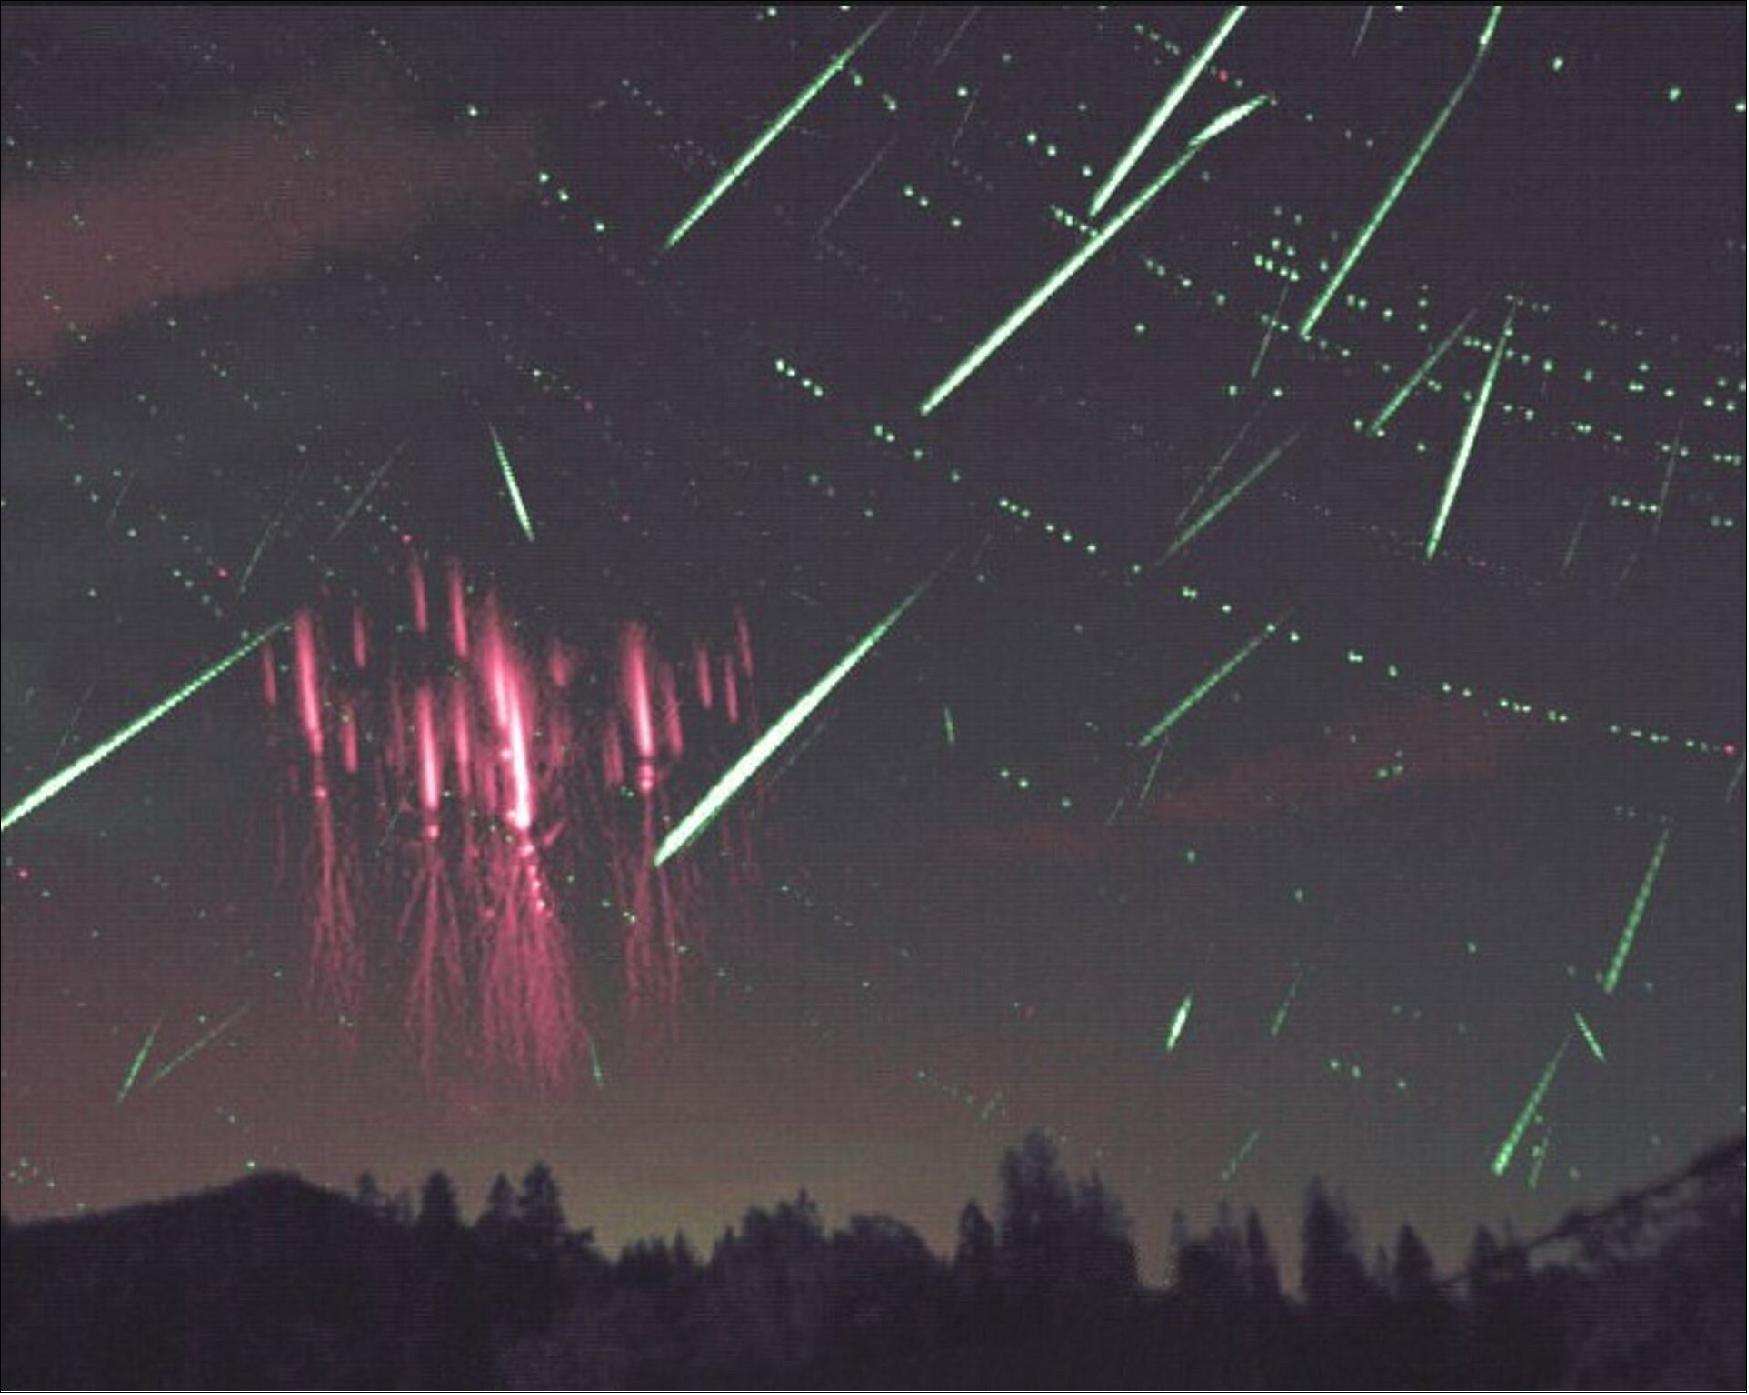 Figure 53: Sprites and presides over the Czech Republic. Sprites and presides observed in the countryside near Nýdek. Although ESA’s Swarm mission did not record this particular event, the photo, taken by Martin Popek, shows how breathtaking these transient luminous events (TLEs) are. Martin first captured TLEs on 22 May 2011 and has since observed 3781 events – most of which were in 2017. The average number of TLEs per active storm is 9.87 and 11.28 per observation night. More images can be found on Martin’s webpage.